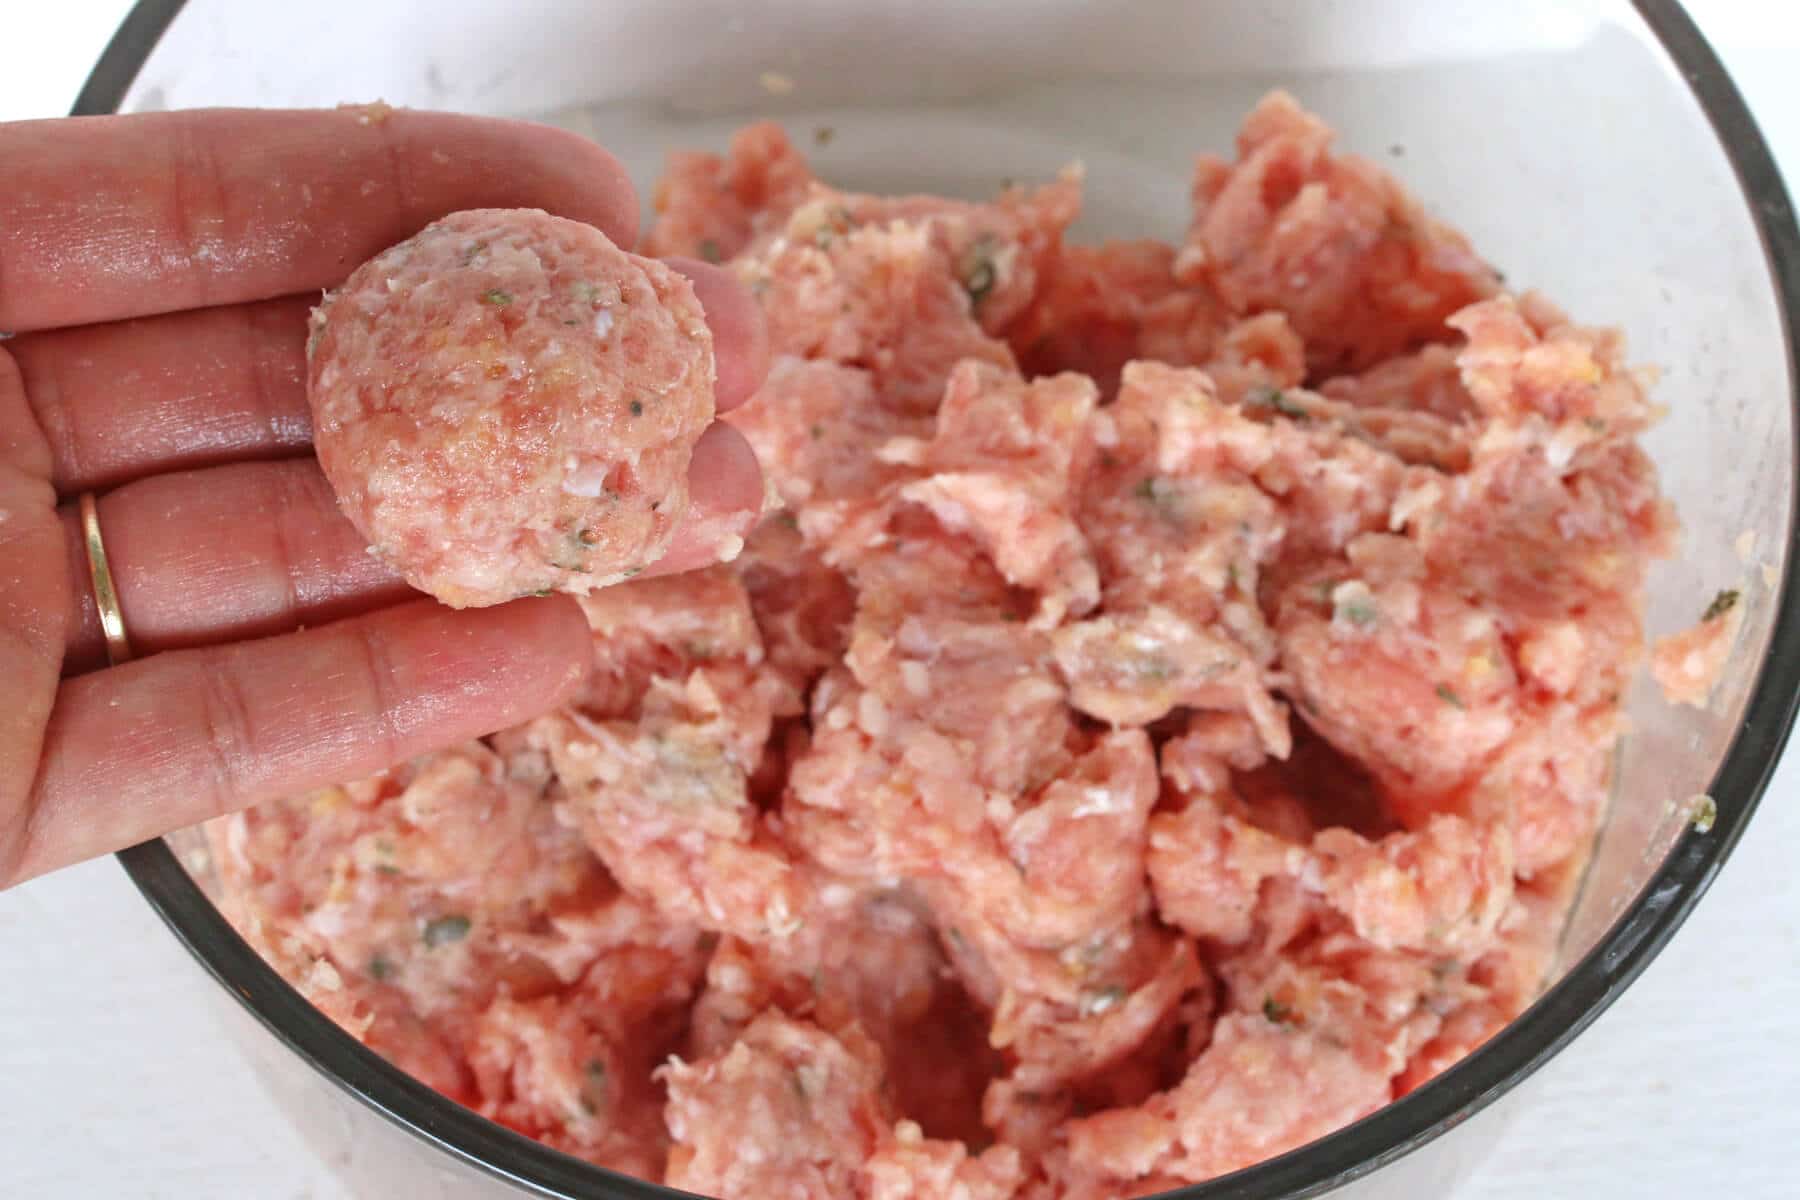 forming the meat mixture into balls